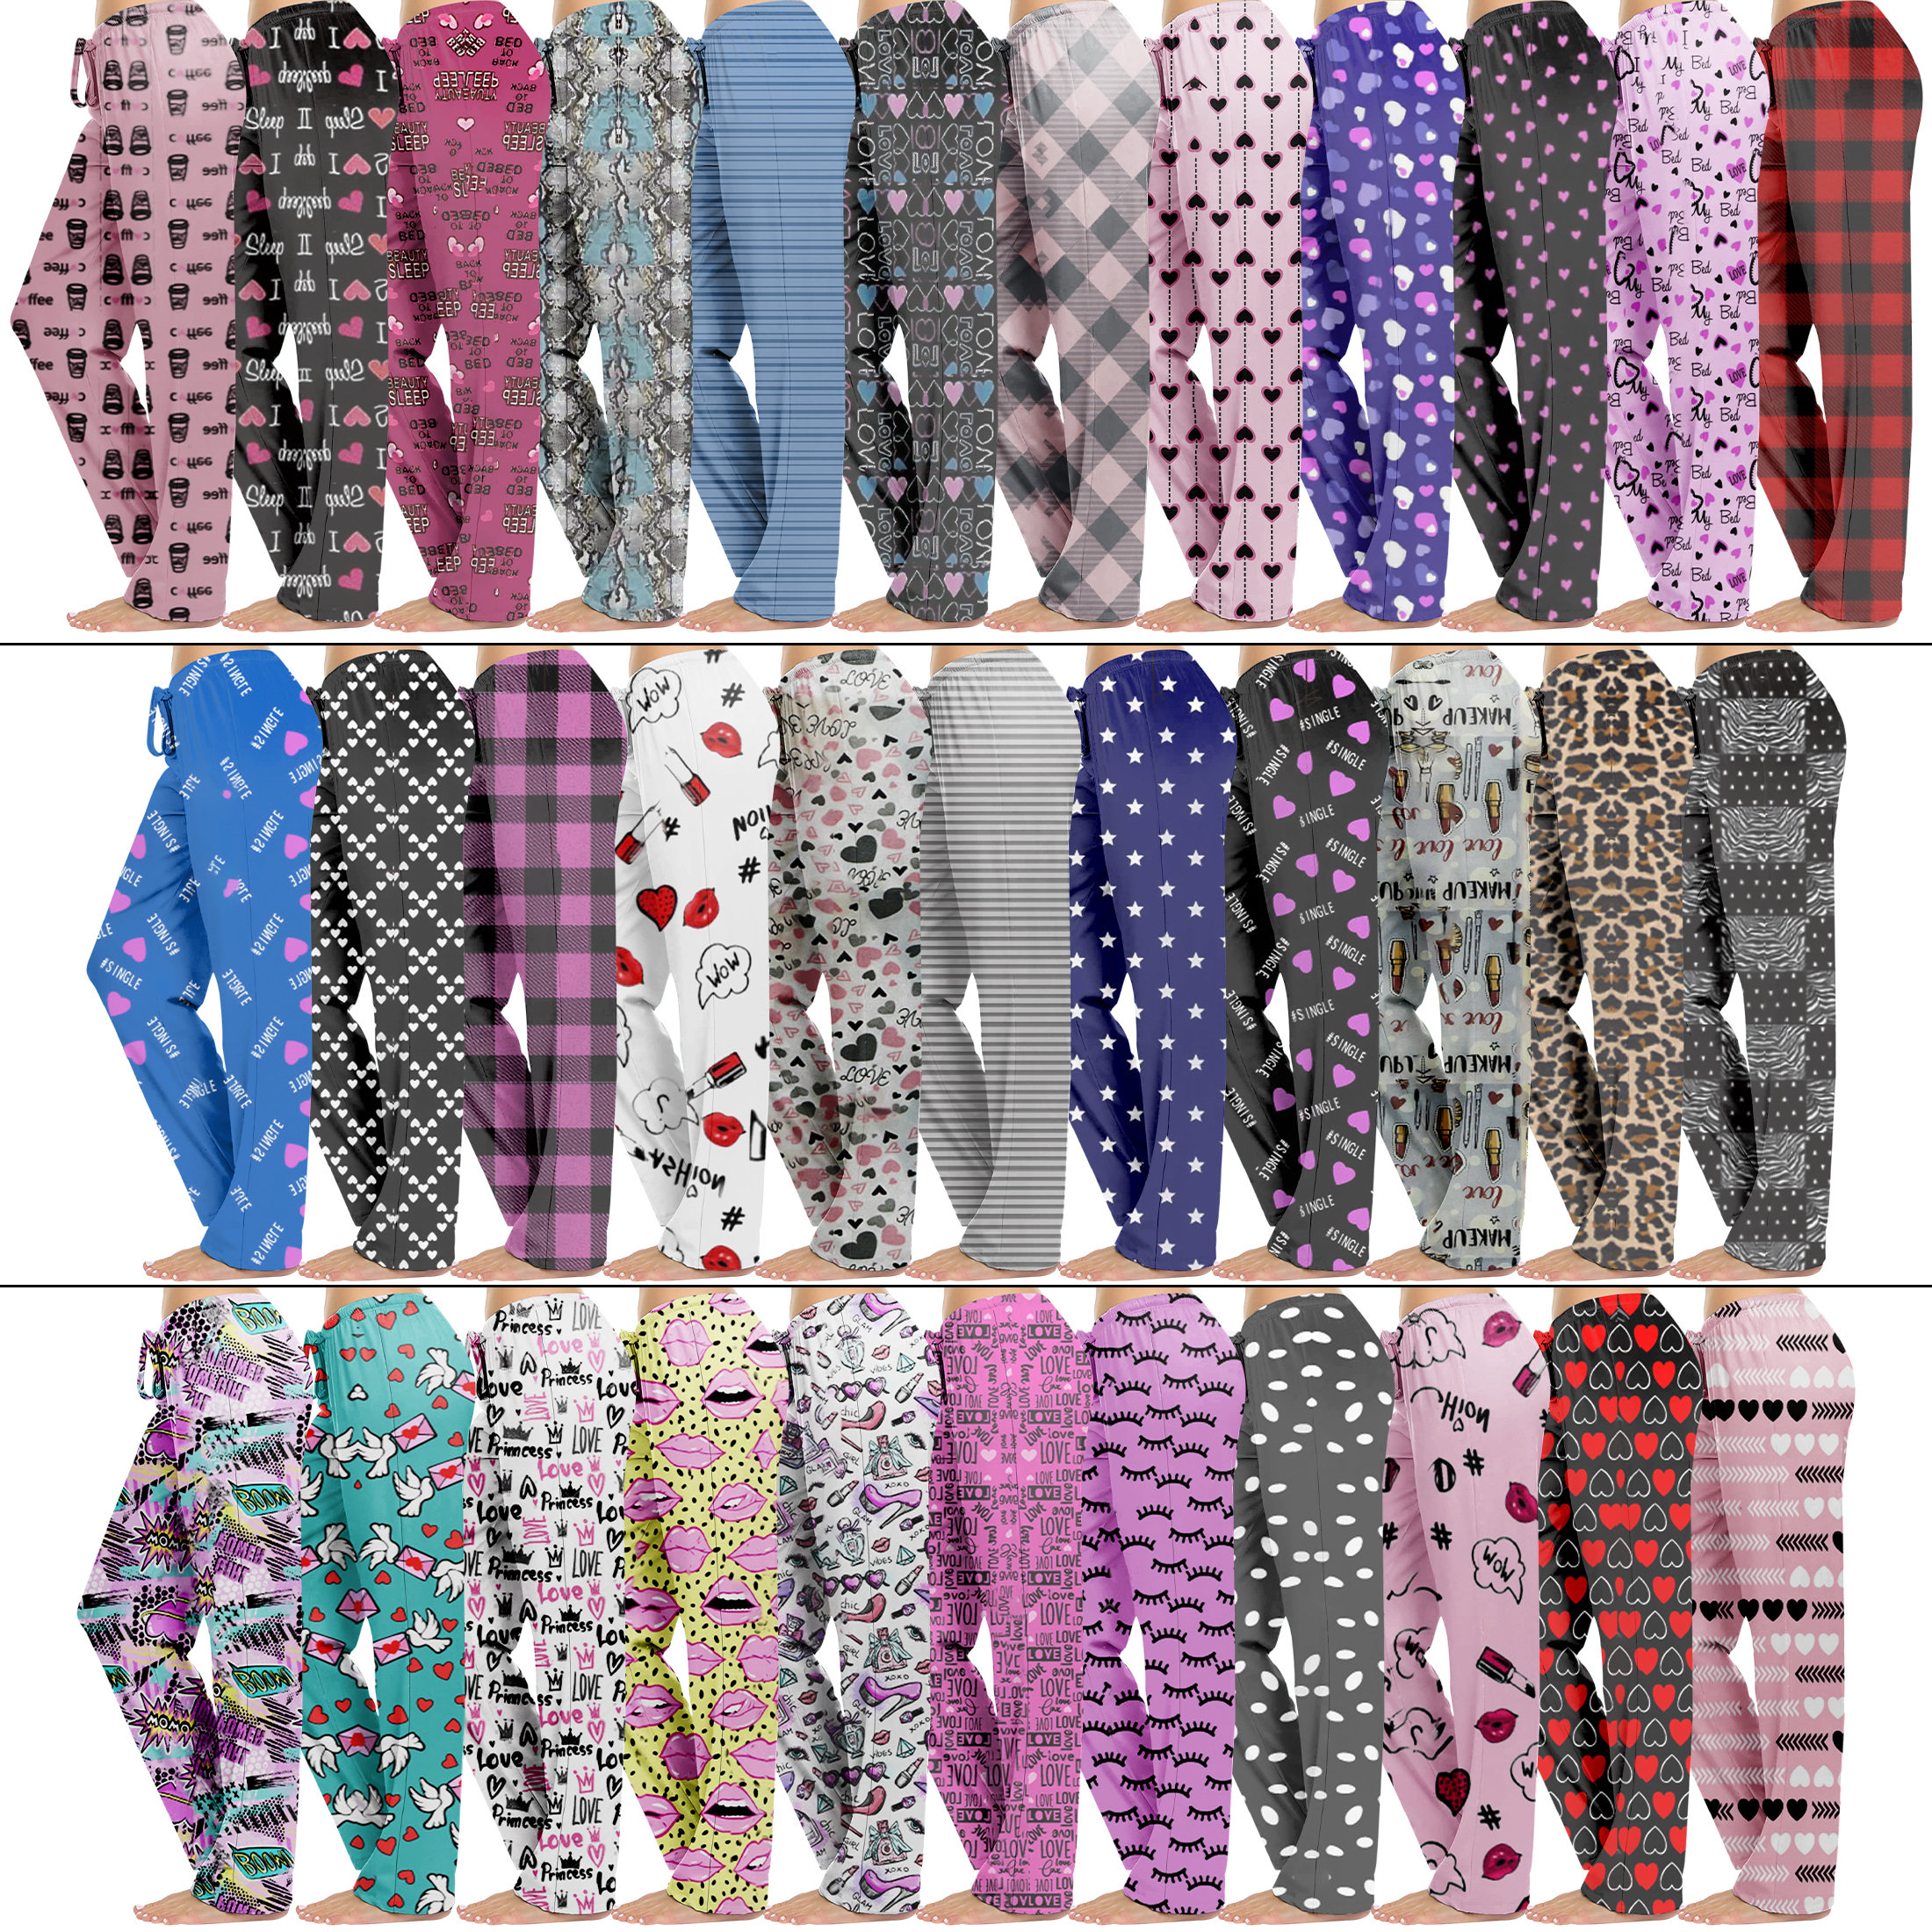 Multi-Pack: Women's Comfy Printed Lounge Pajama Pants For Sleepwear - 1 Pack, Small